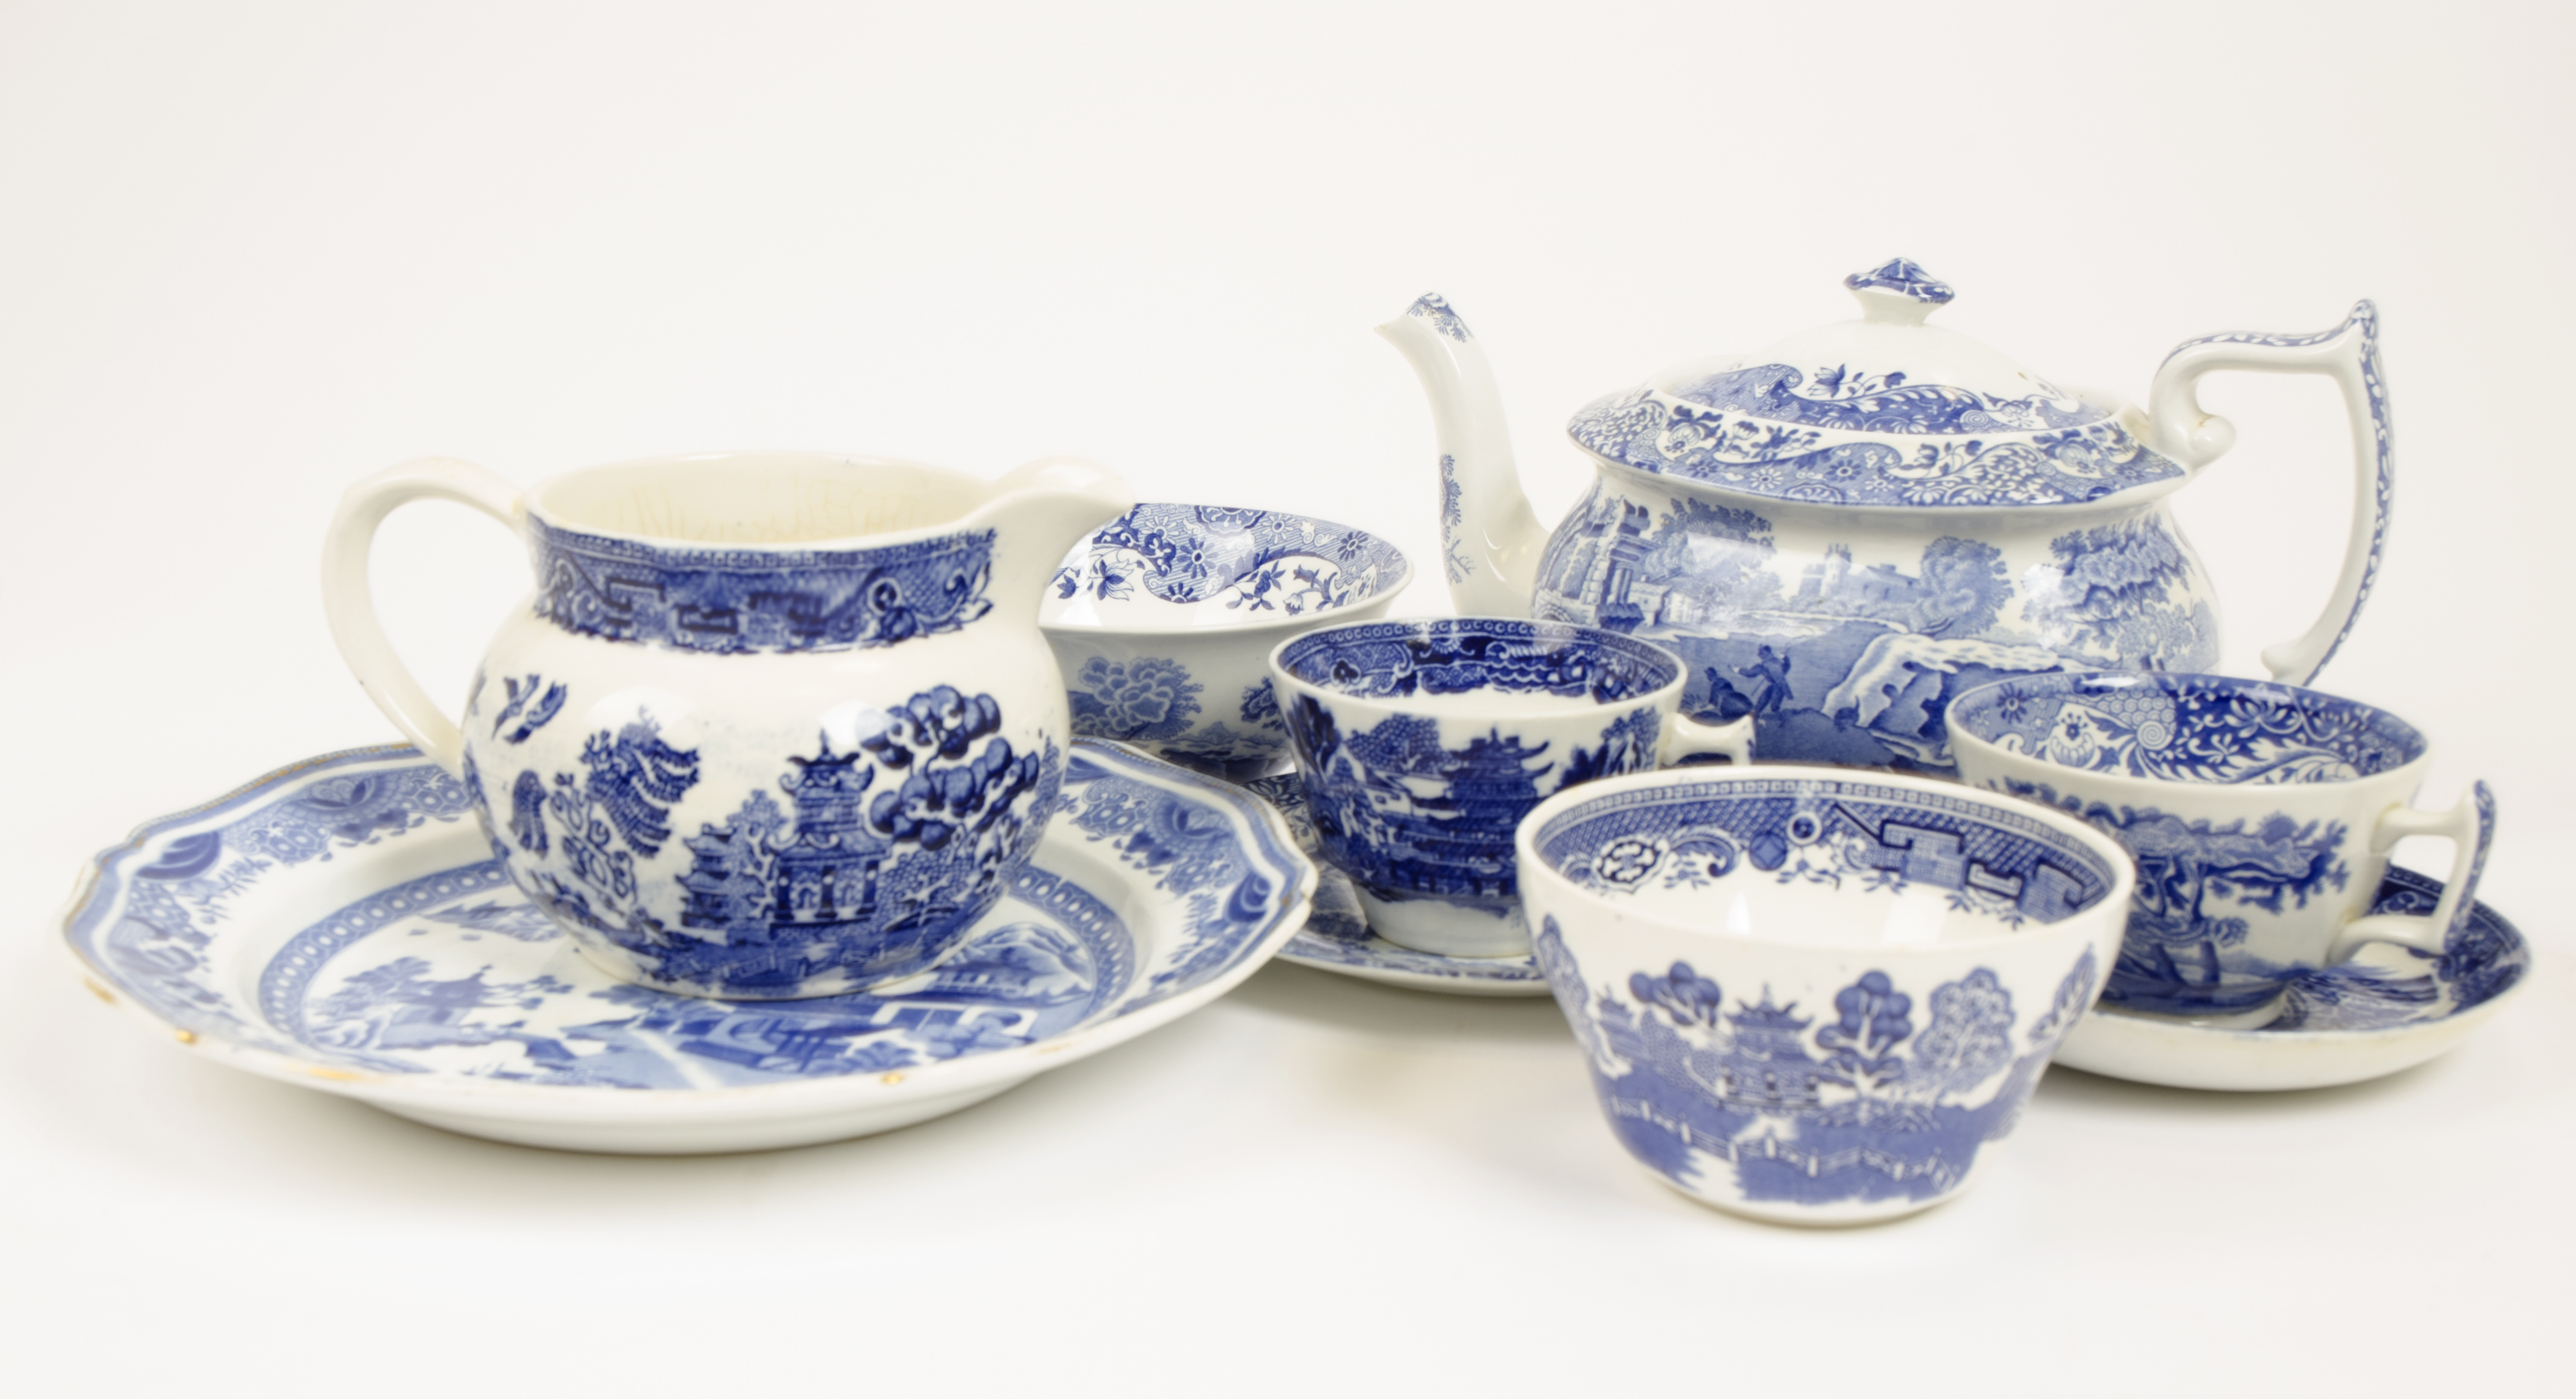 A collection of 19th Century Spode blue and white printed ceramics, seven teacups, nine saucers,